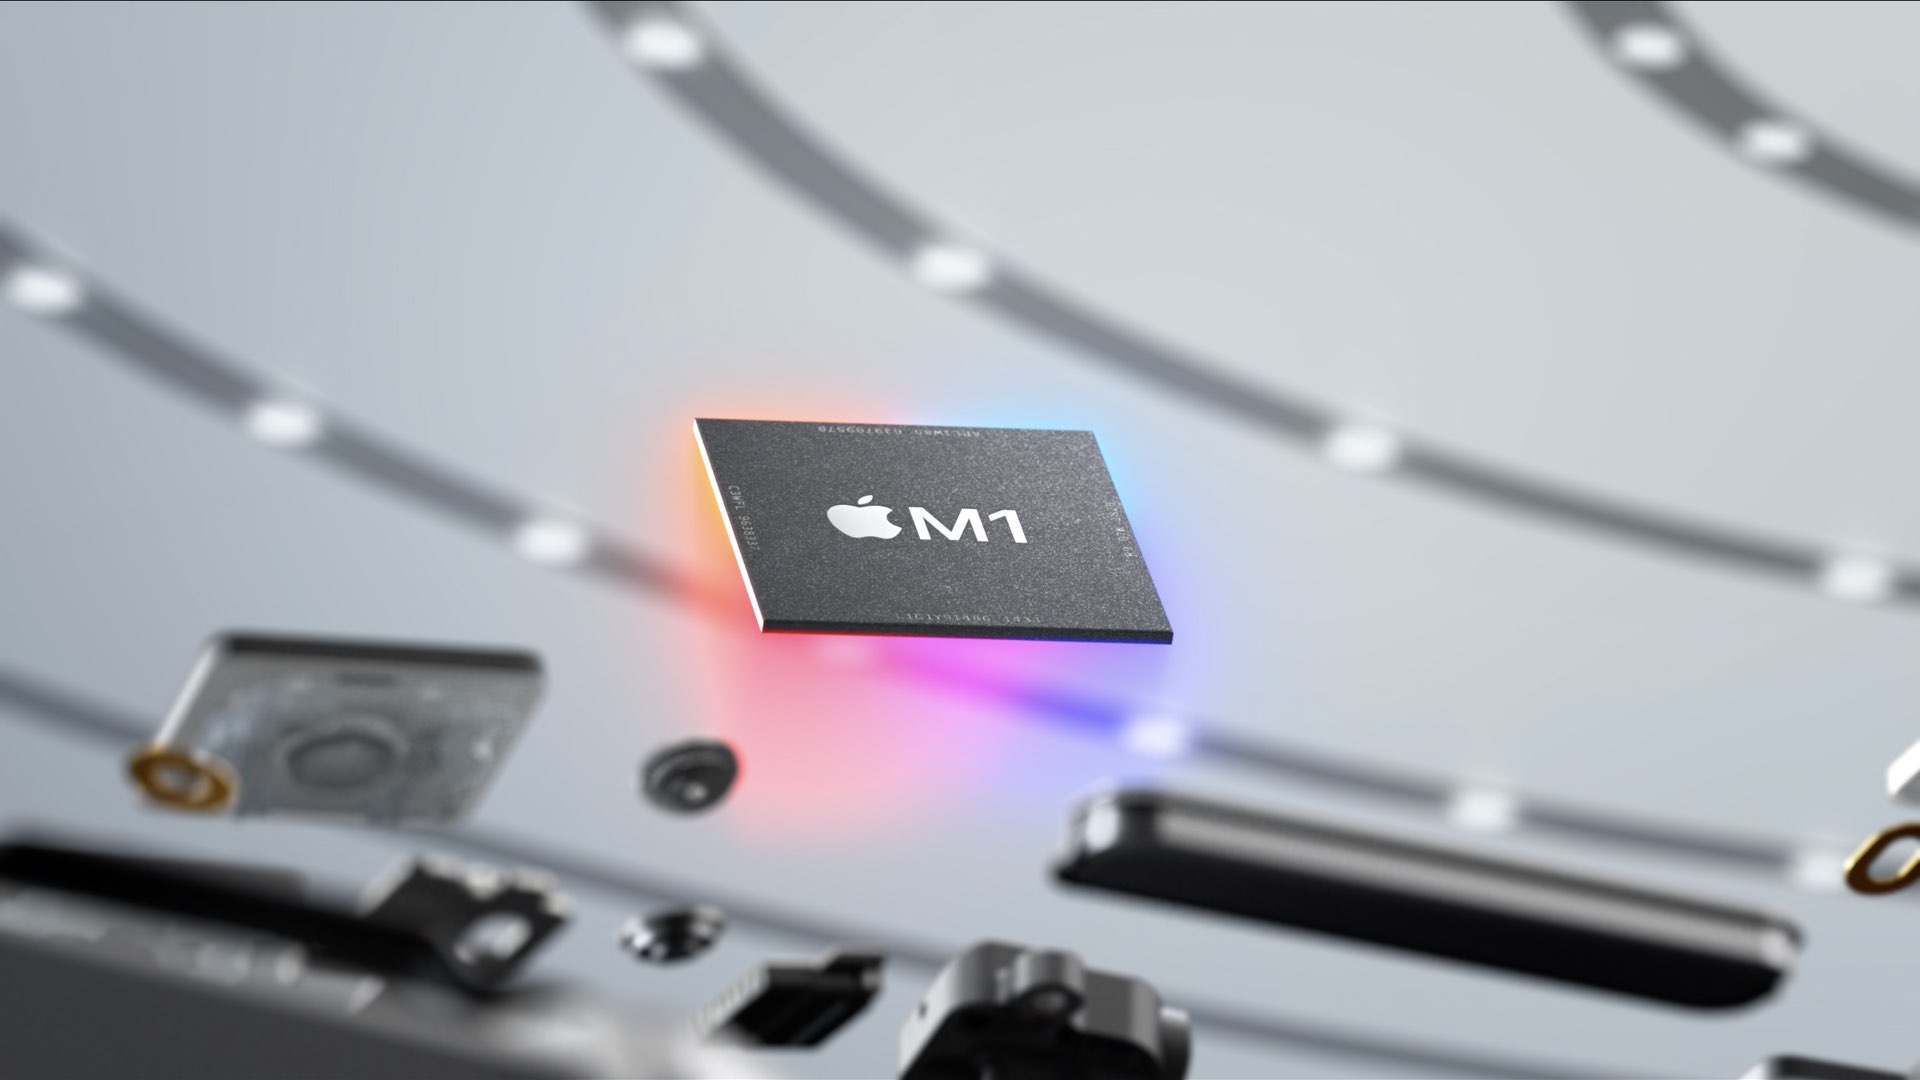 Apple is working on M1 successors for 2021 iMac & MacBook ...